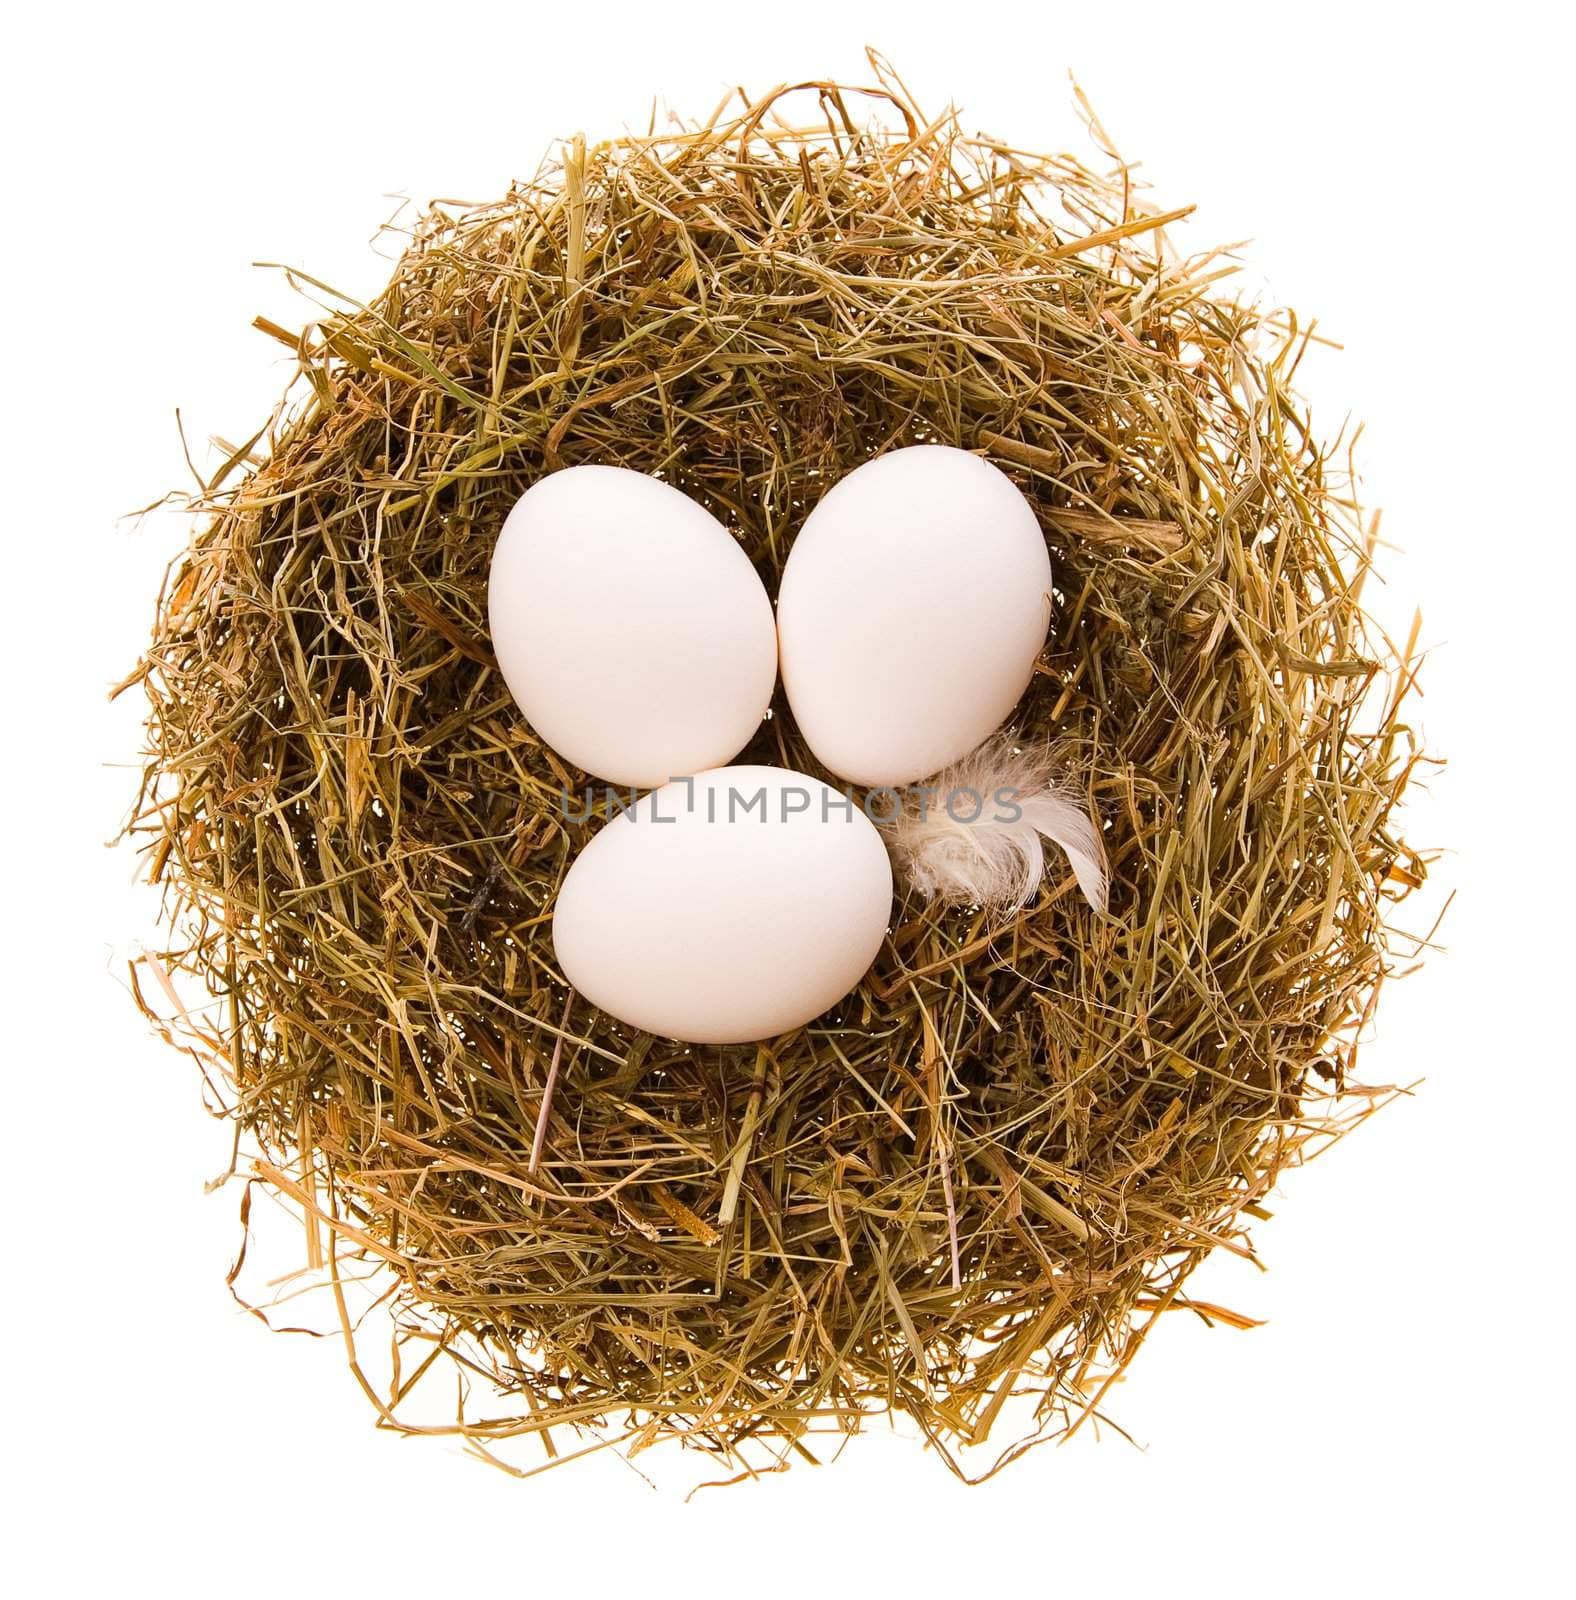 Three chicken white eggs in a small nest from a dry grass on a white background
